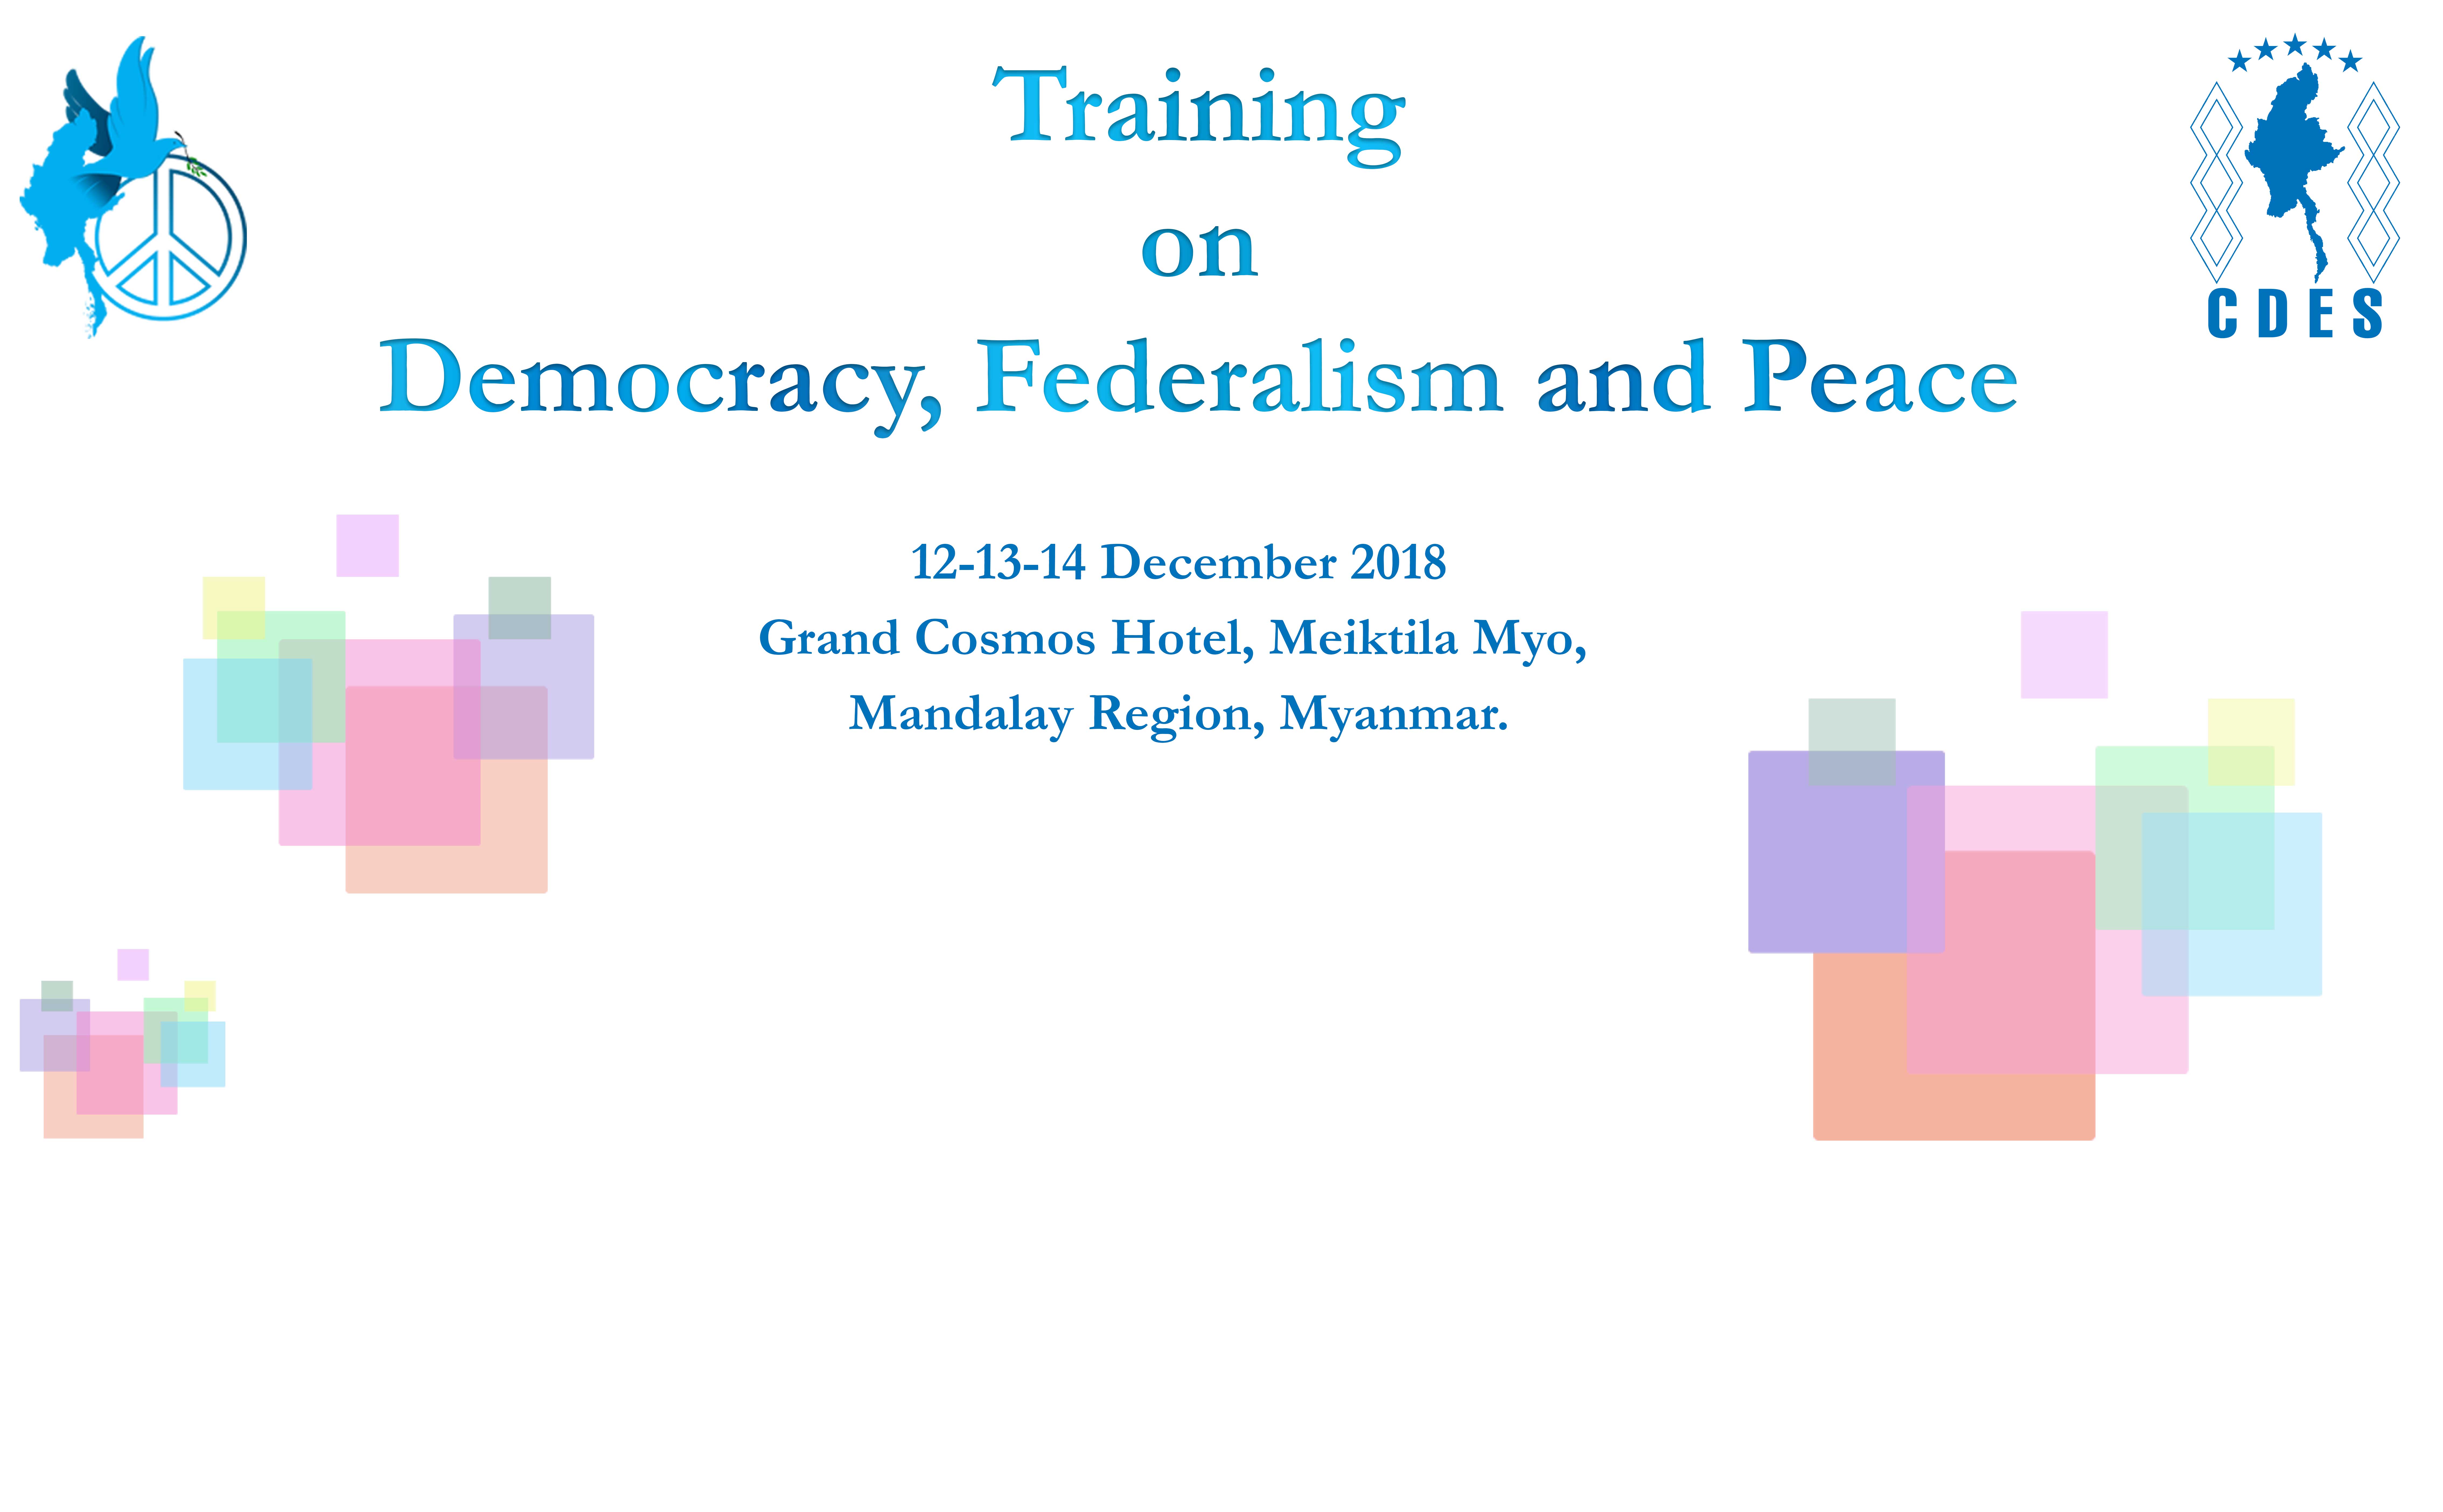 Training on Democracy, Federalism and Peace